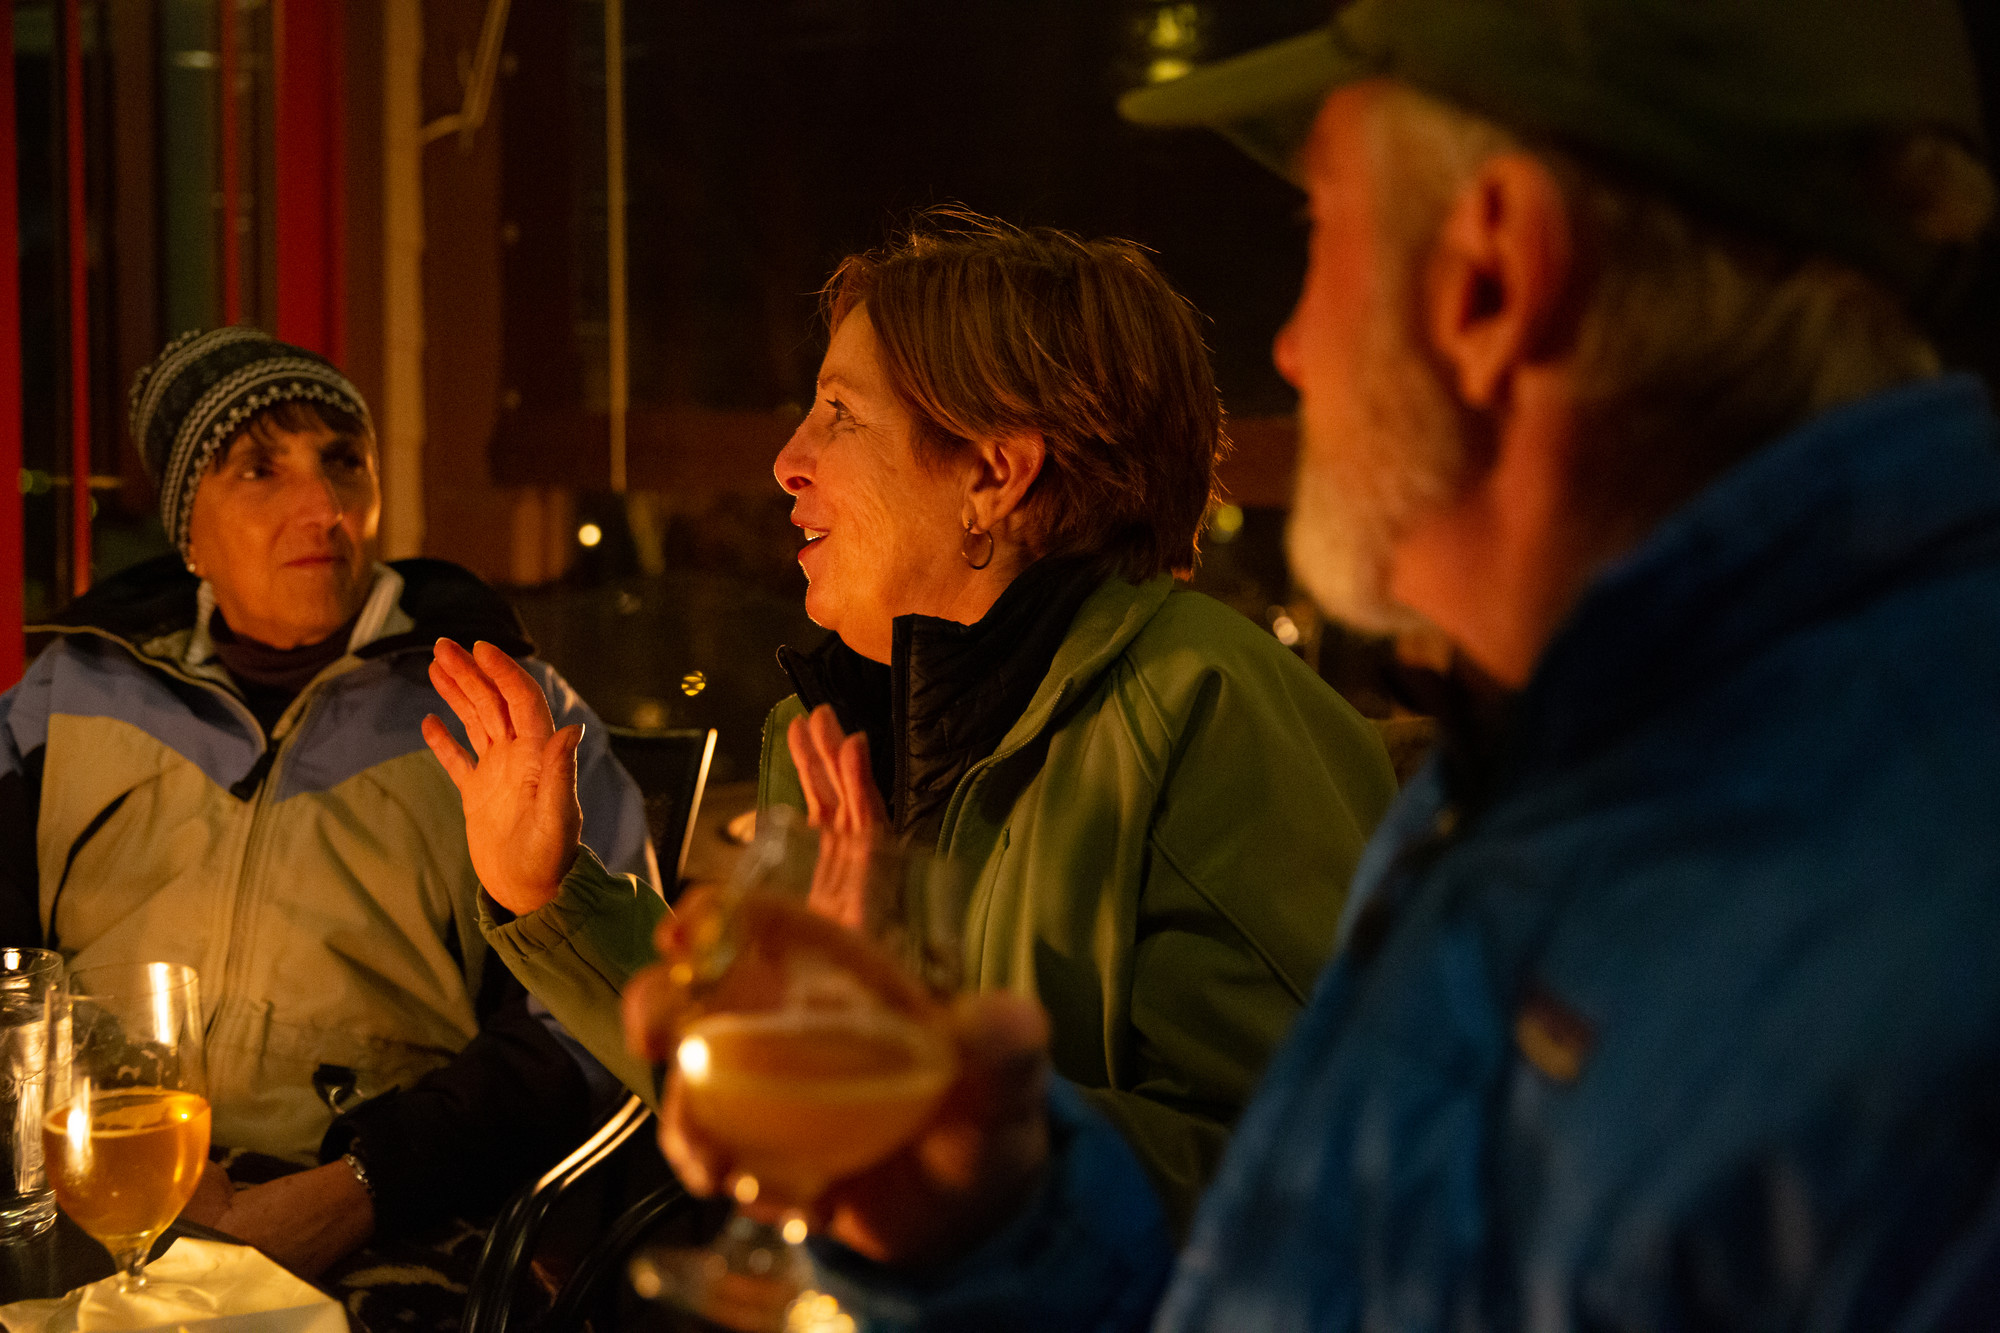 Two women and a man chat over a meal at an outdoor fire in winter.